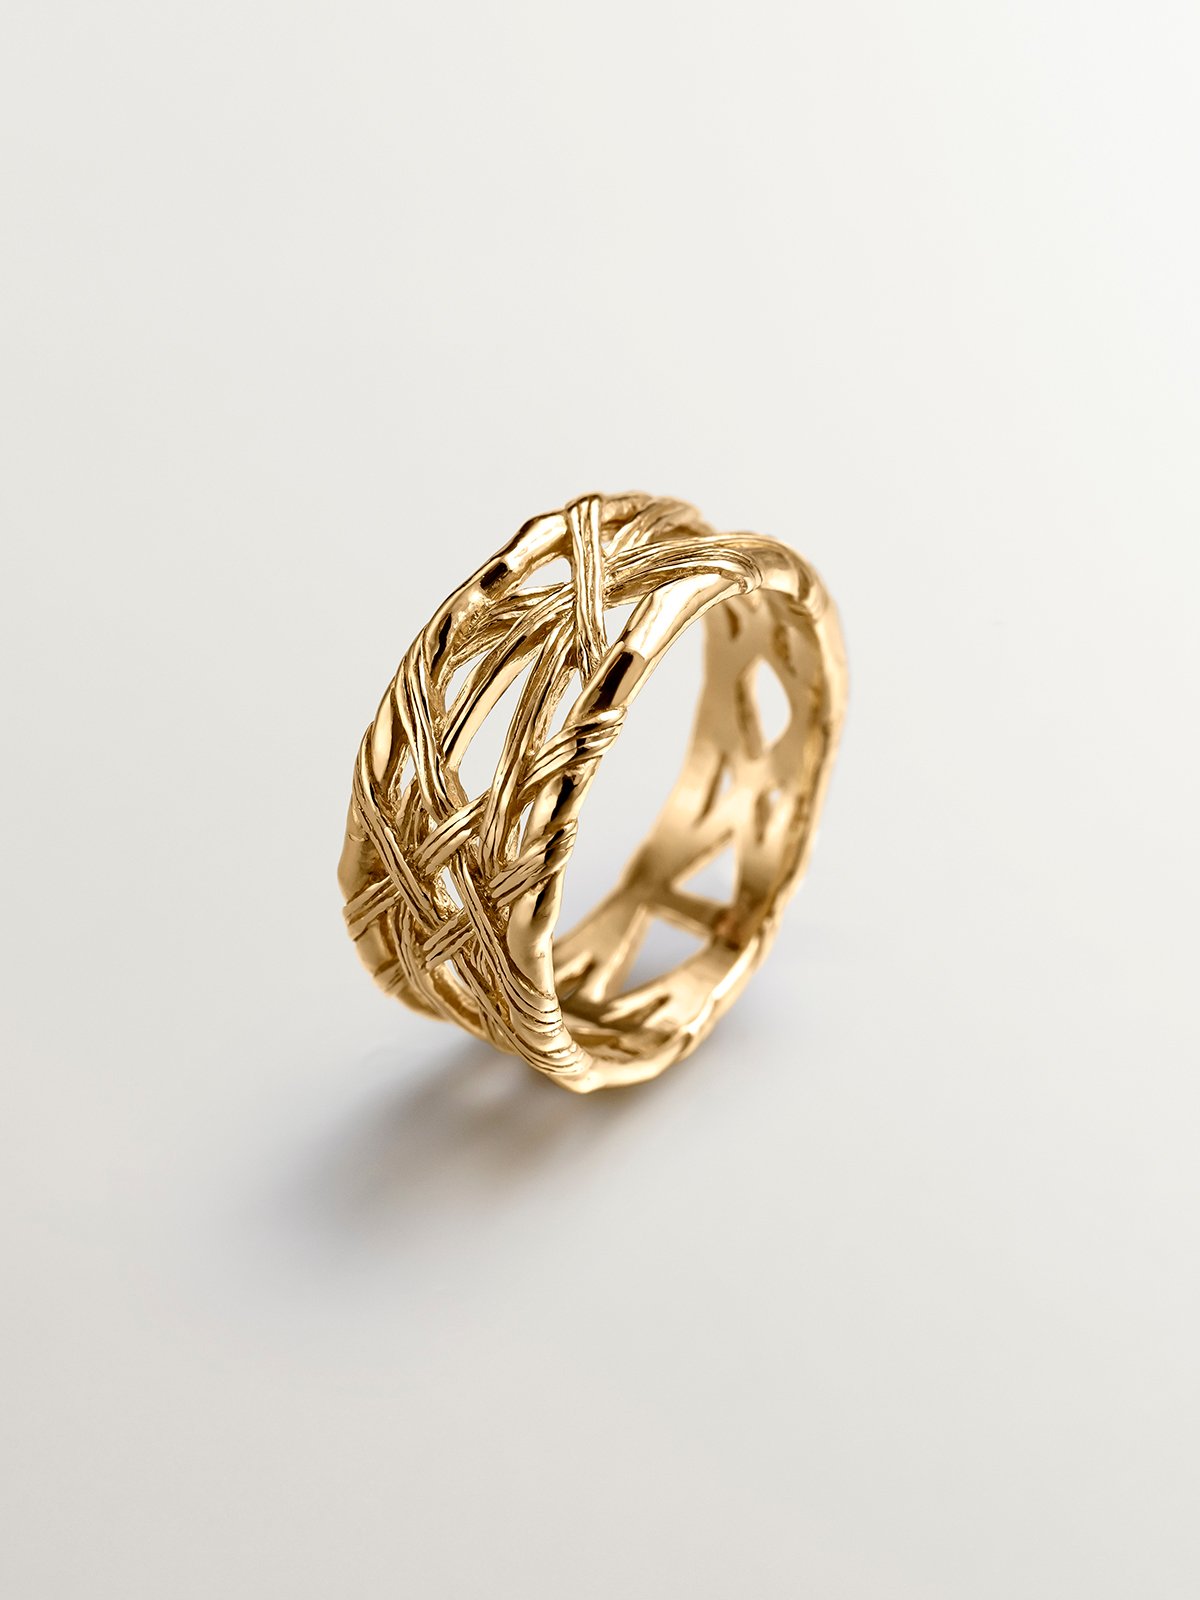 925 Silver ring bathed in 18K yellow gold with wicker texture.